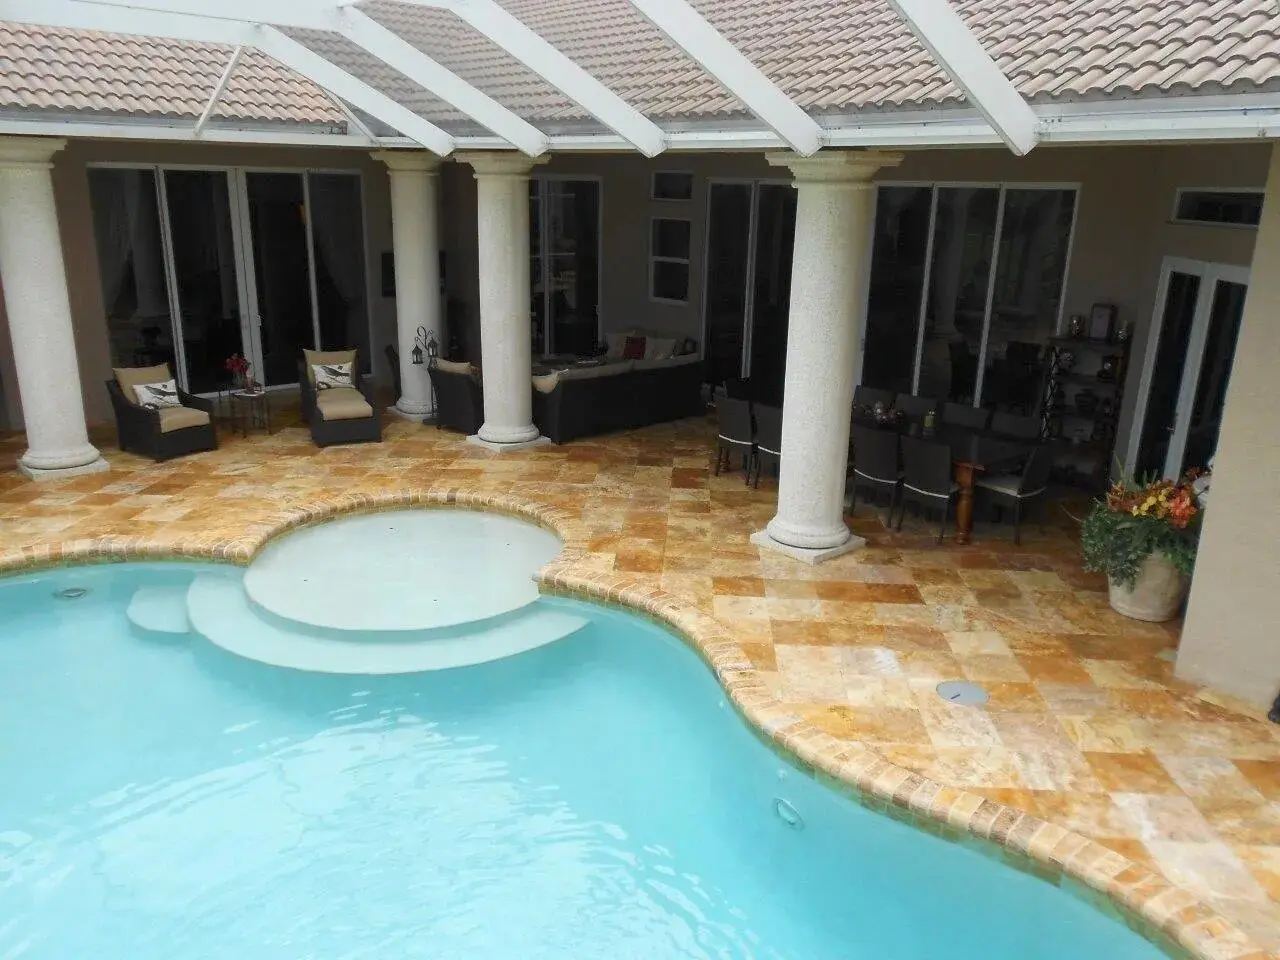 A pool with a large patio area and a stone wall.